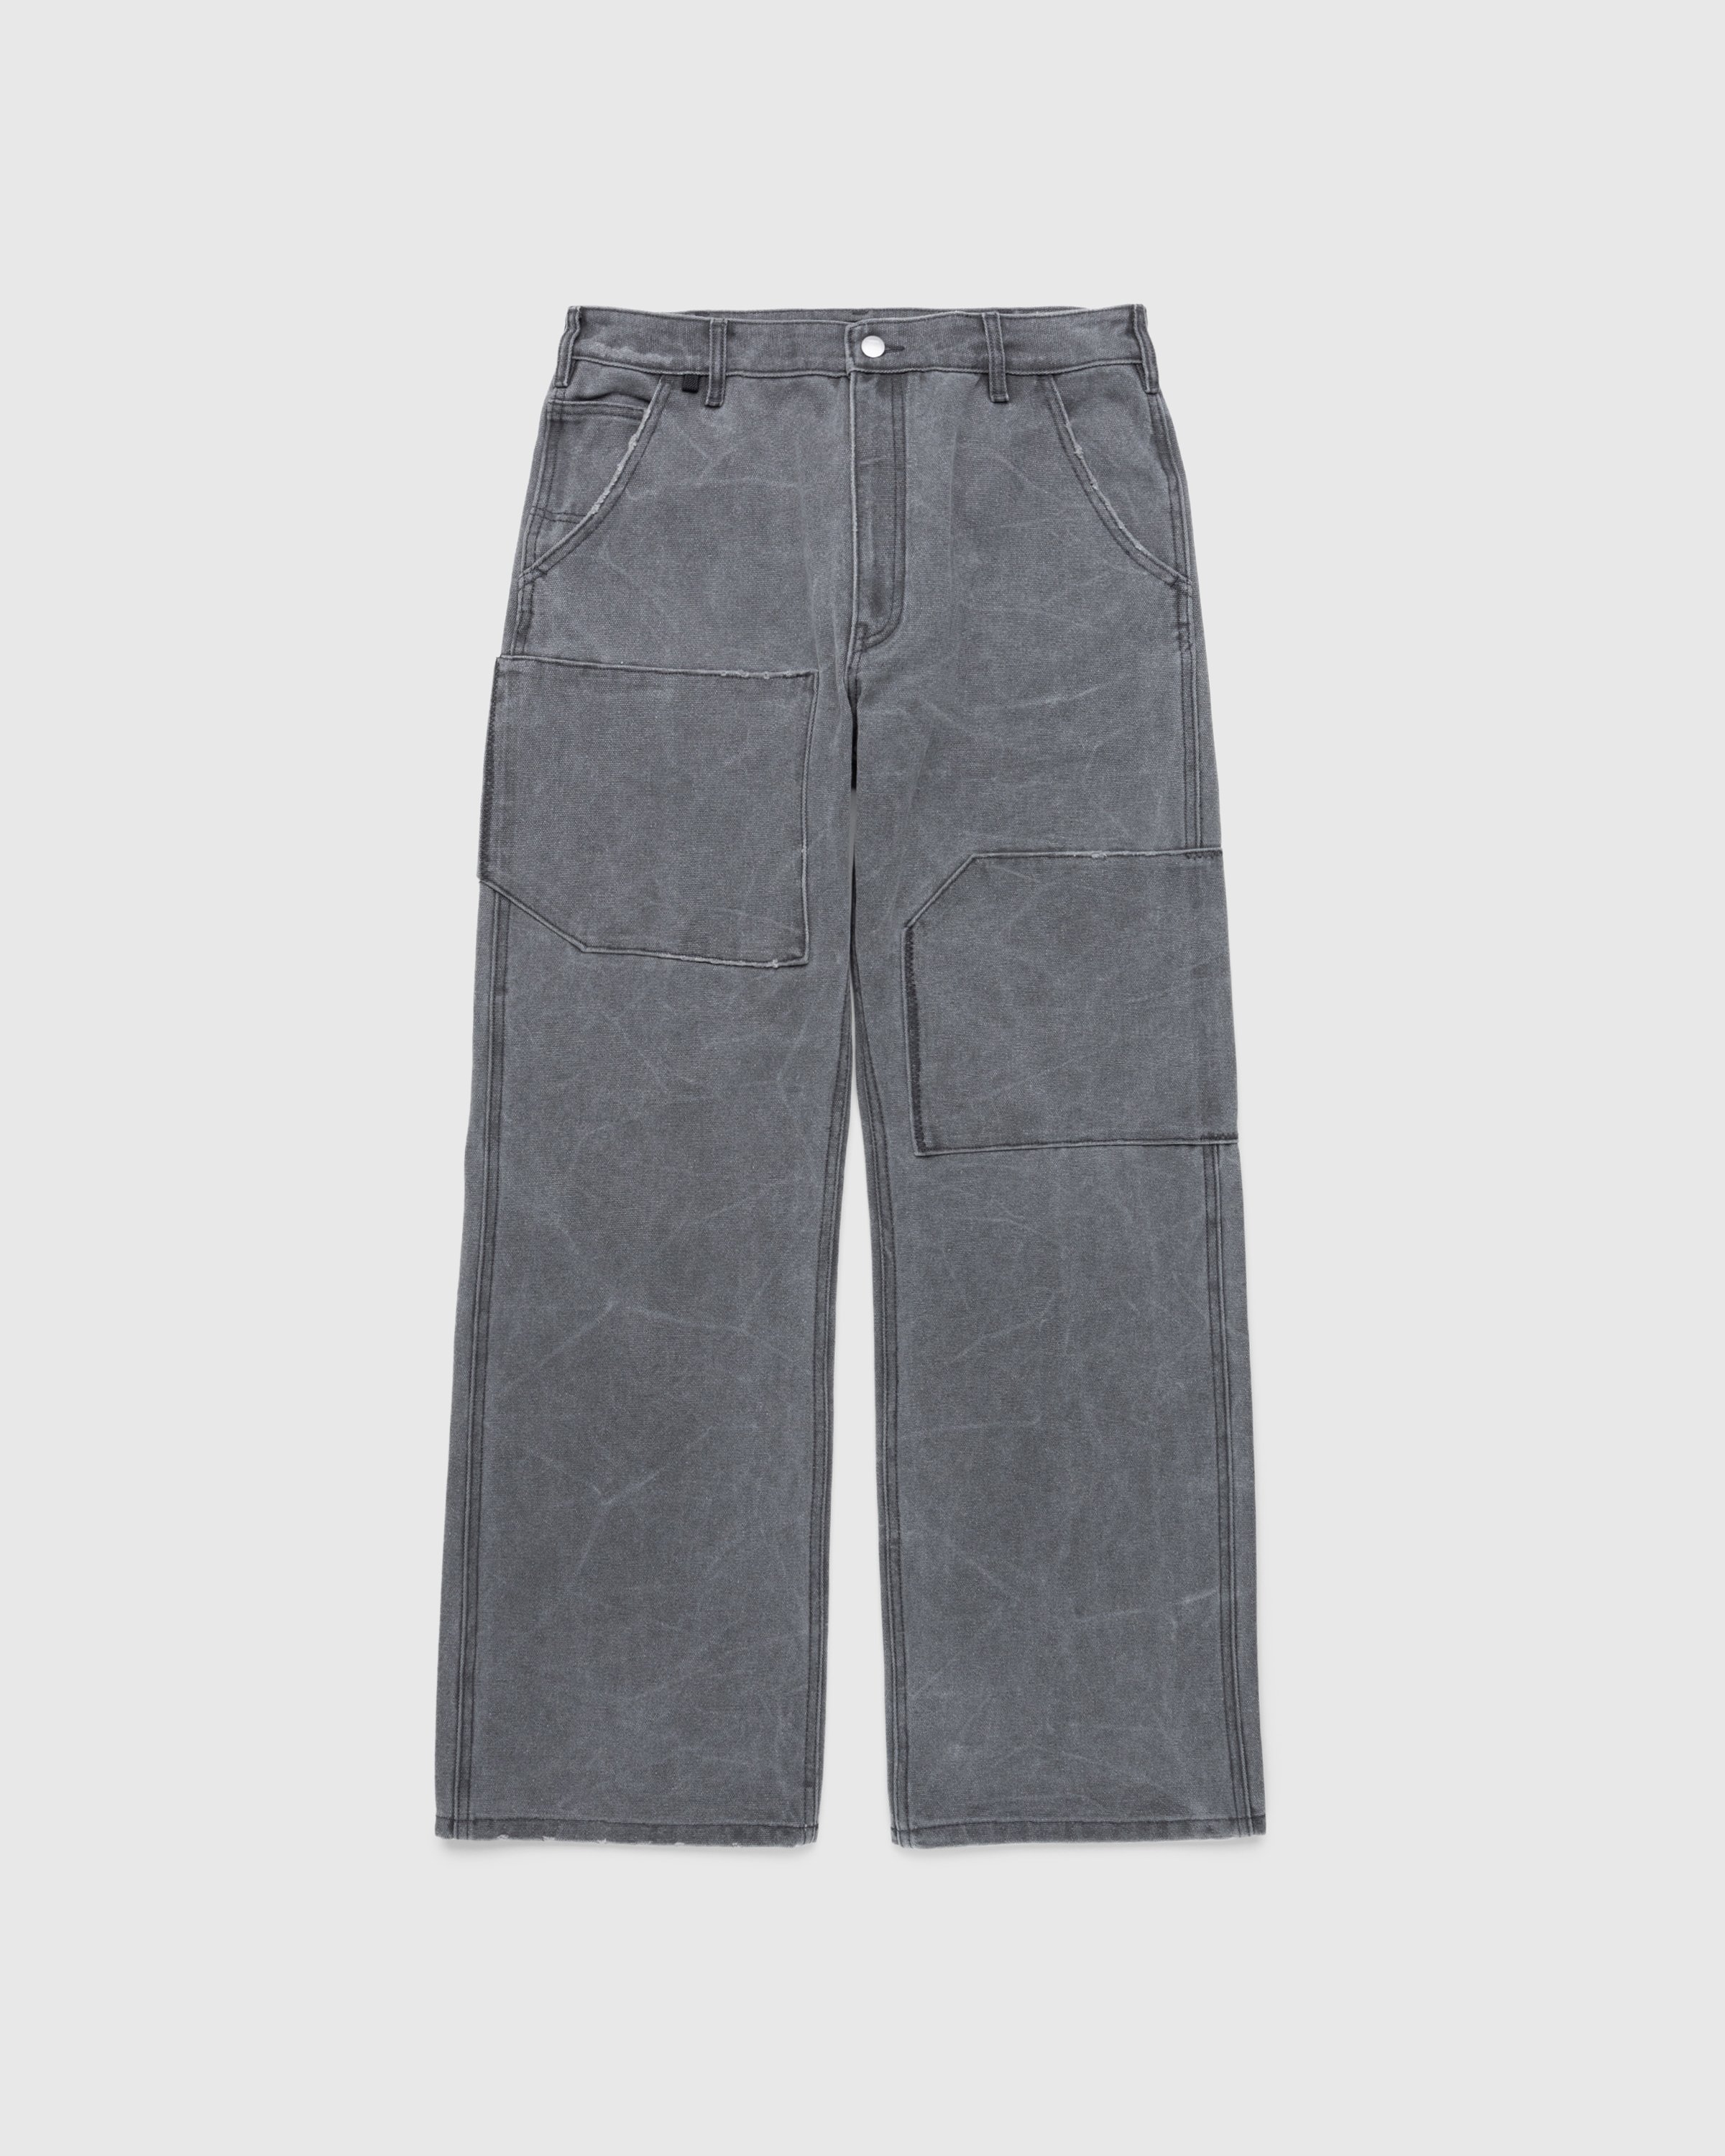 Acne Studios - Patch Canvas Trousers Carbon Gray - Clothing - Grey - Image 1